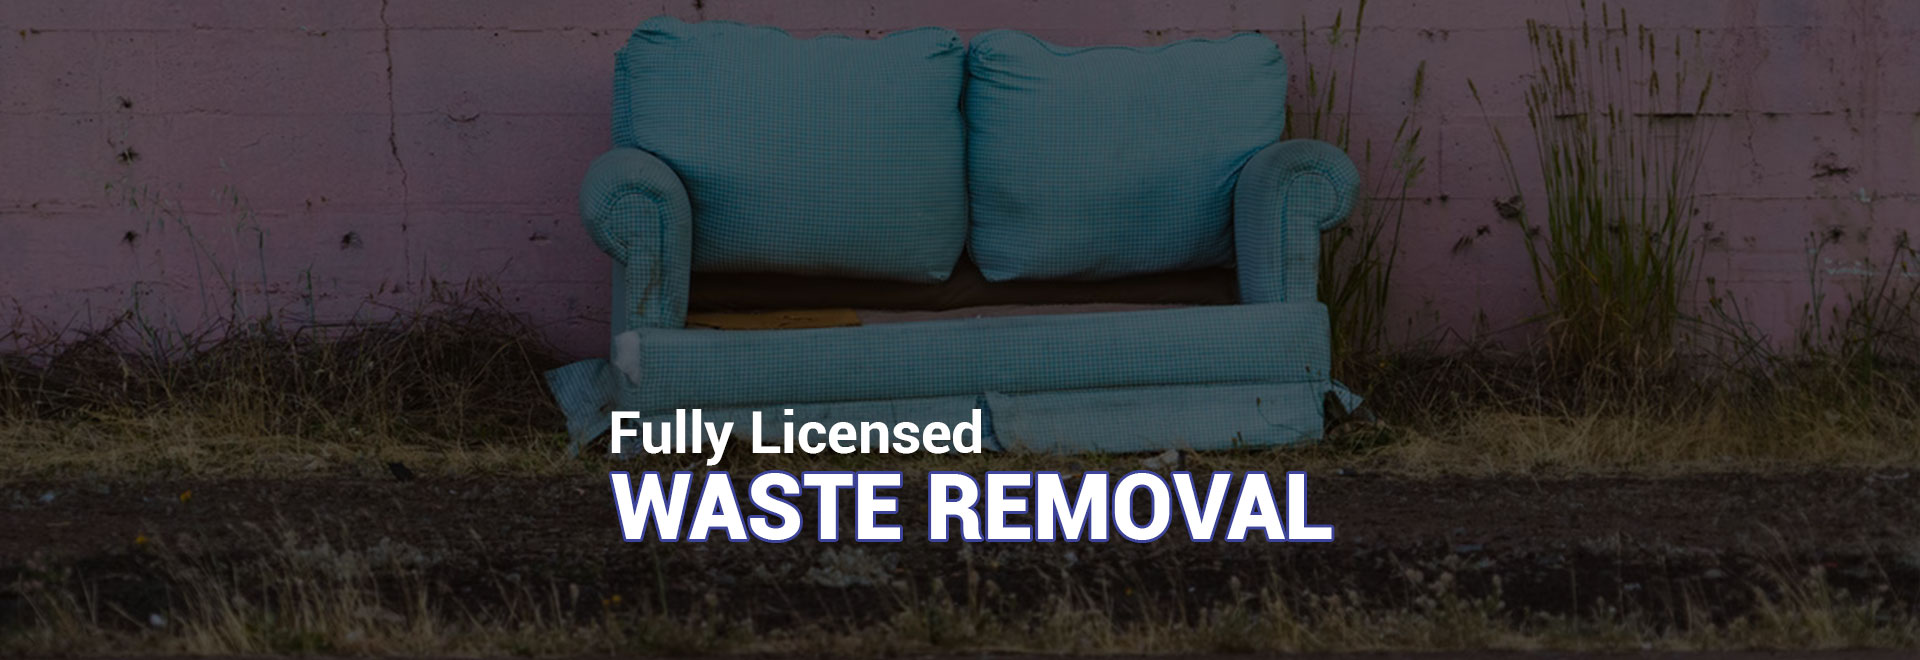 fully-licensed-waste-rubbish-removal-whitley-bay-north-tyneside